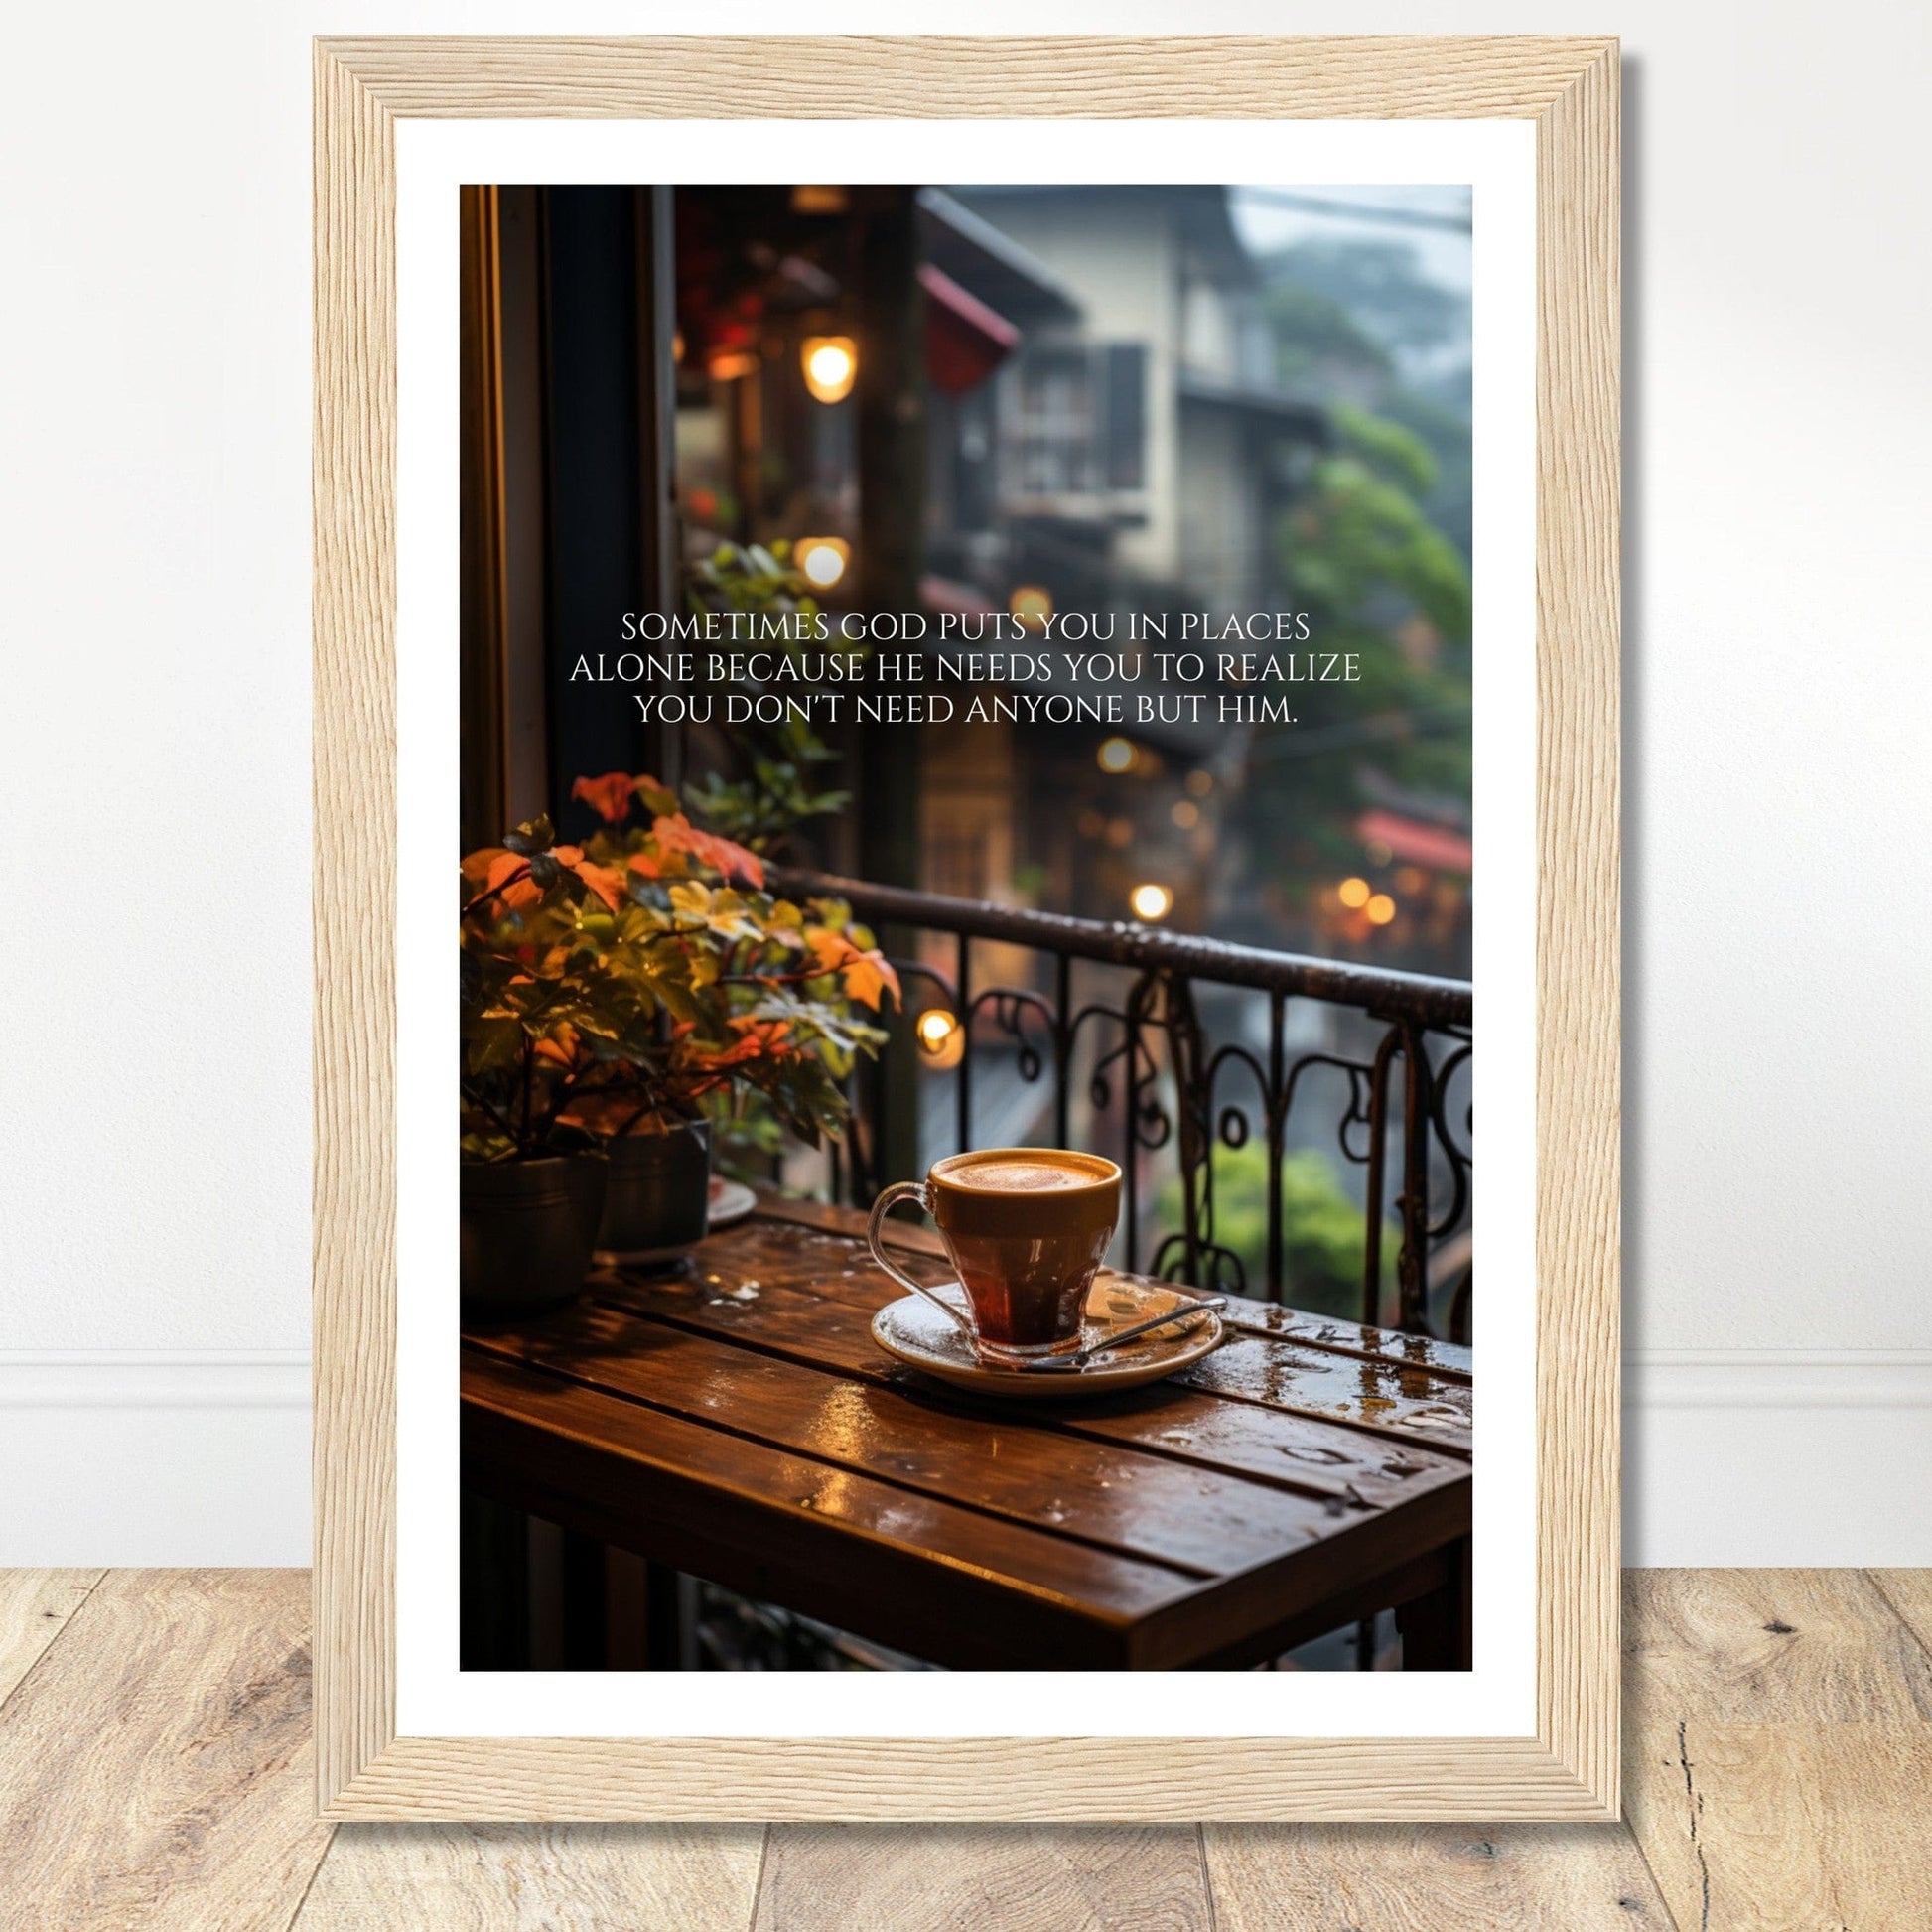 Coffee With My Father Print Material A4 21x29.7 cm / 8x12″ / Wood frame Premium Matte Paper Wooden Framed Poster